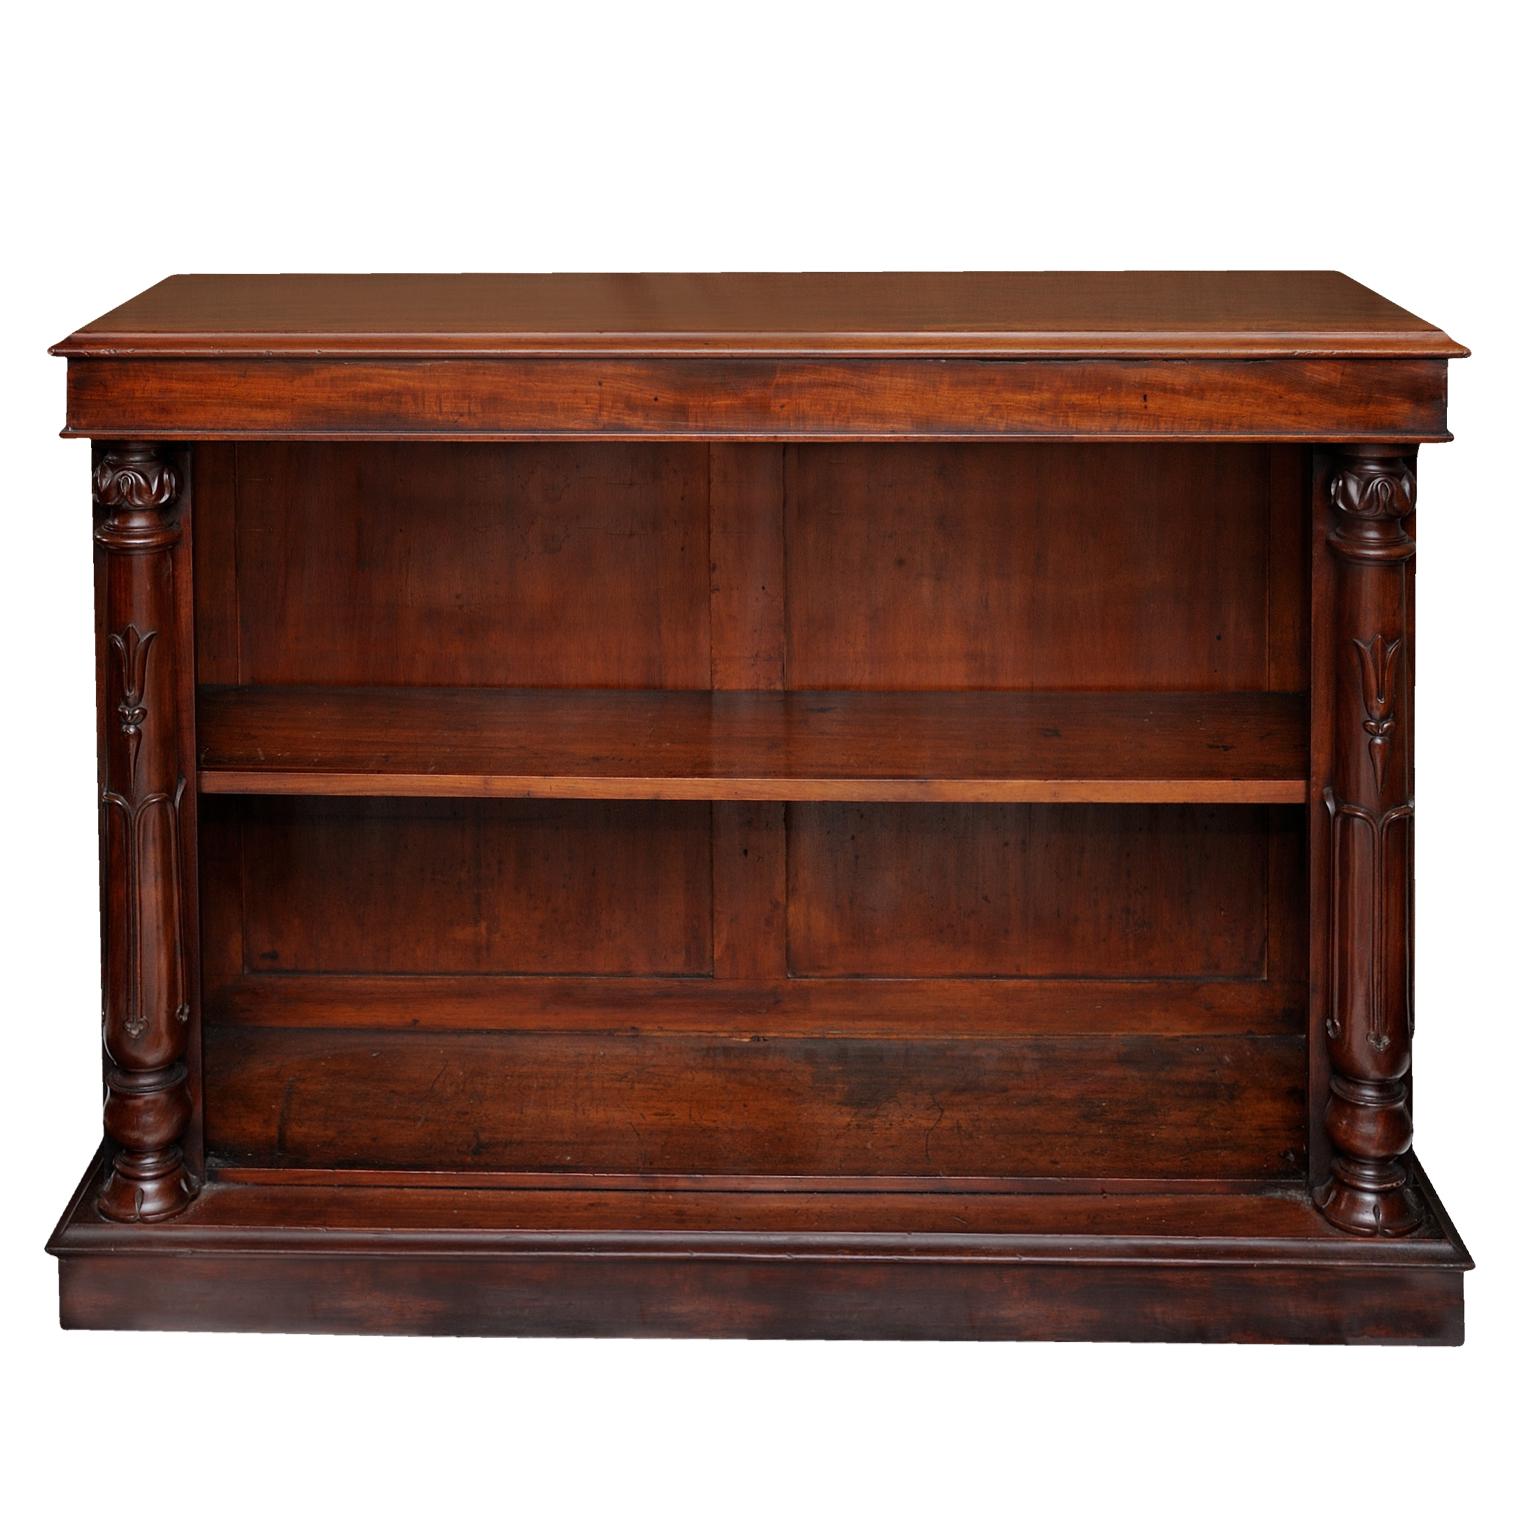 This is a lovely example of a fine English George IV mahogany open bookcase, circa 1825. 
A superb piece of great proportions.